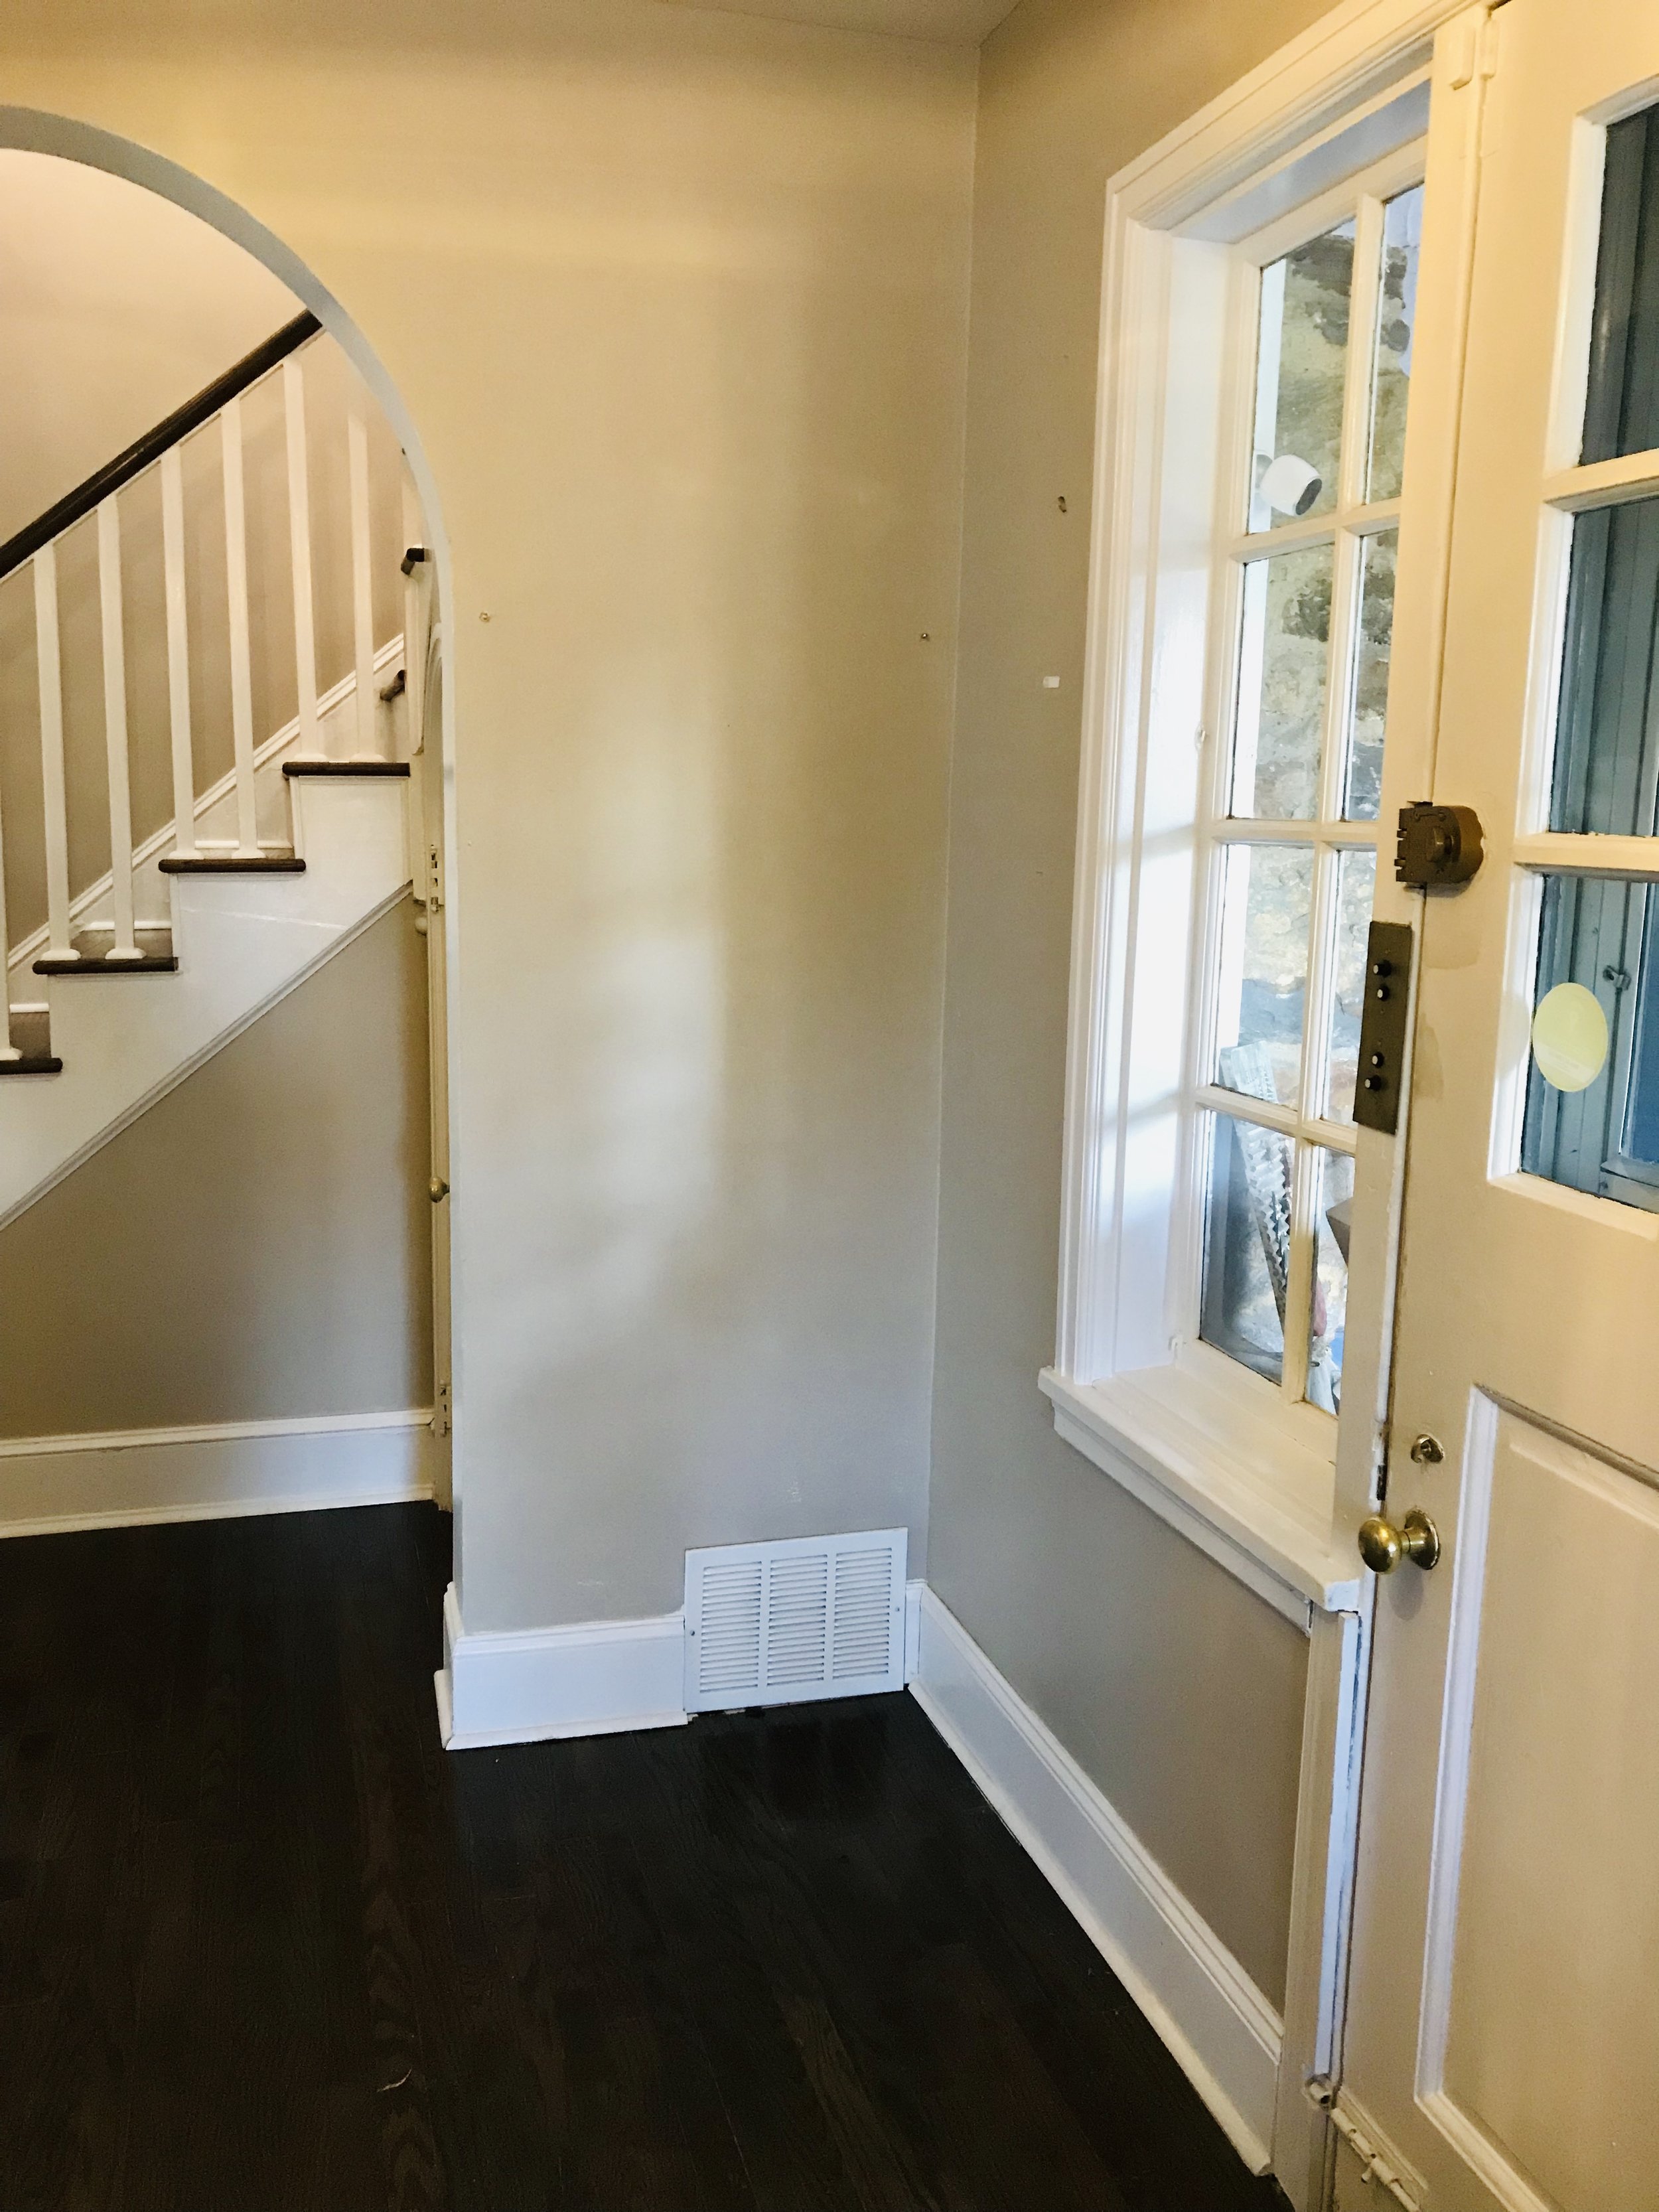  A longtime client asked me to create a mudroom space for them in this little corner by their front door.  They liked the look of a mudroom locker built in I had done a few years back with black walnut benches and white trim work, so using that as in